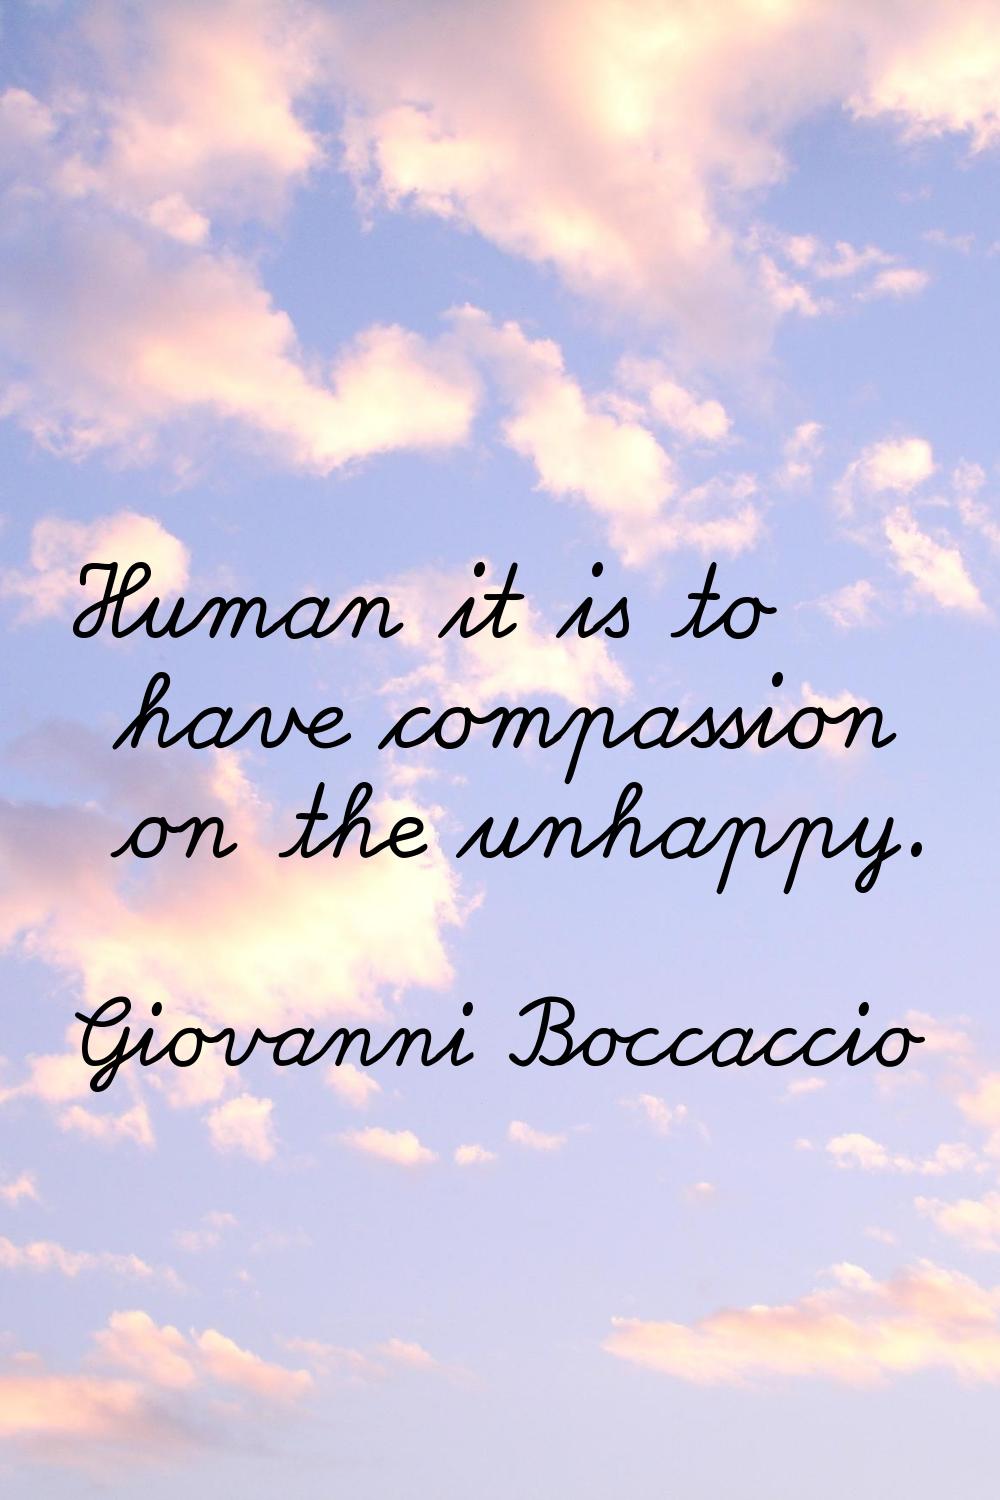 Human it is to have compassion on the unhappy.